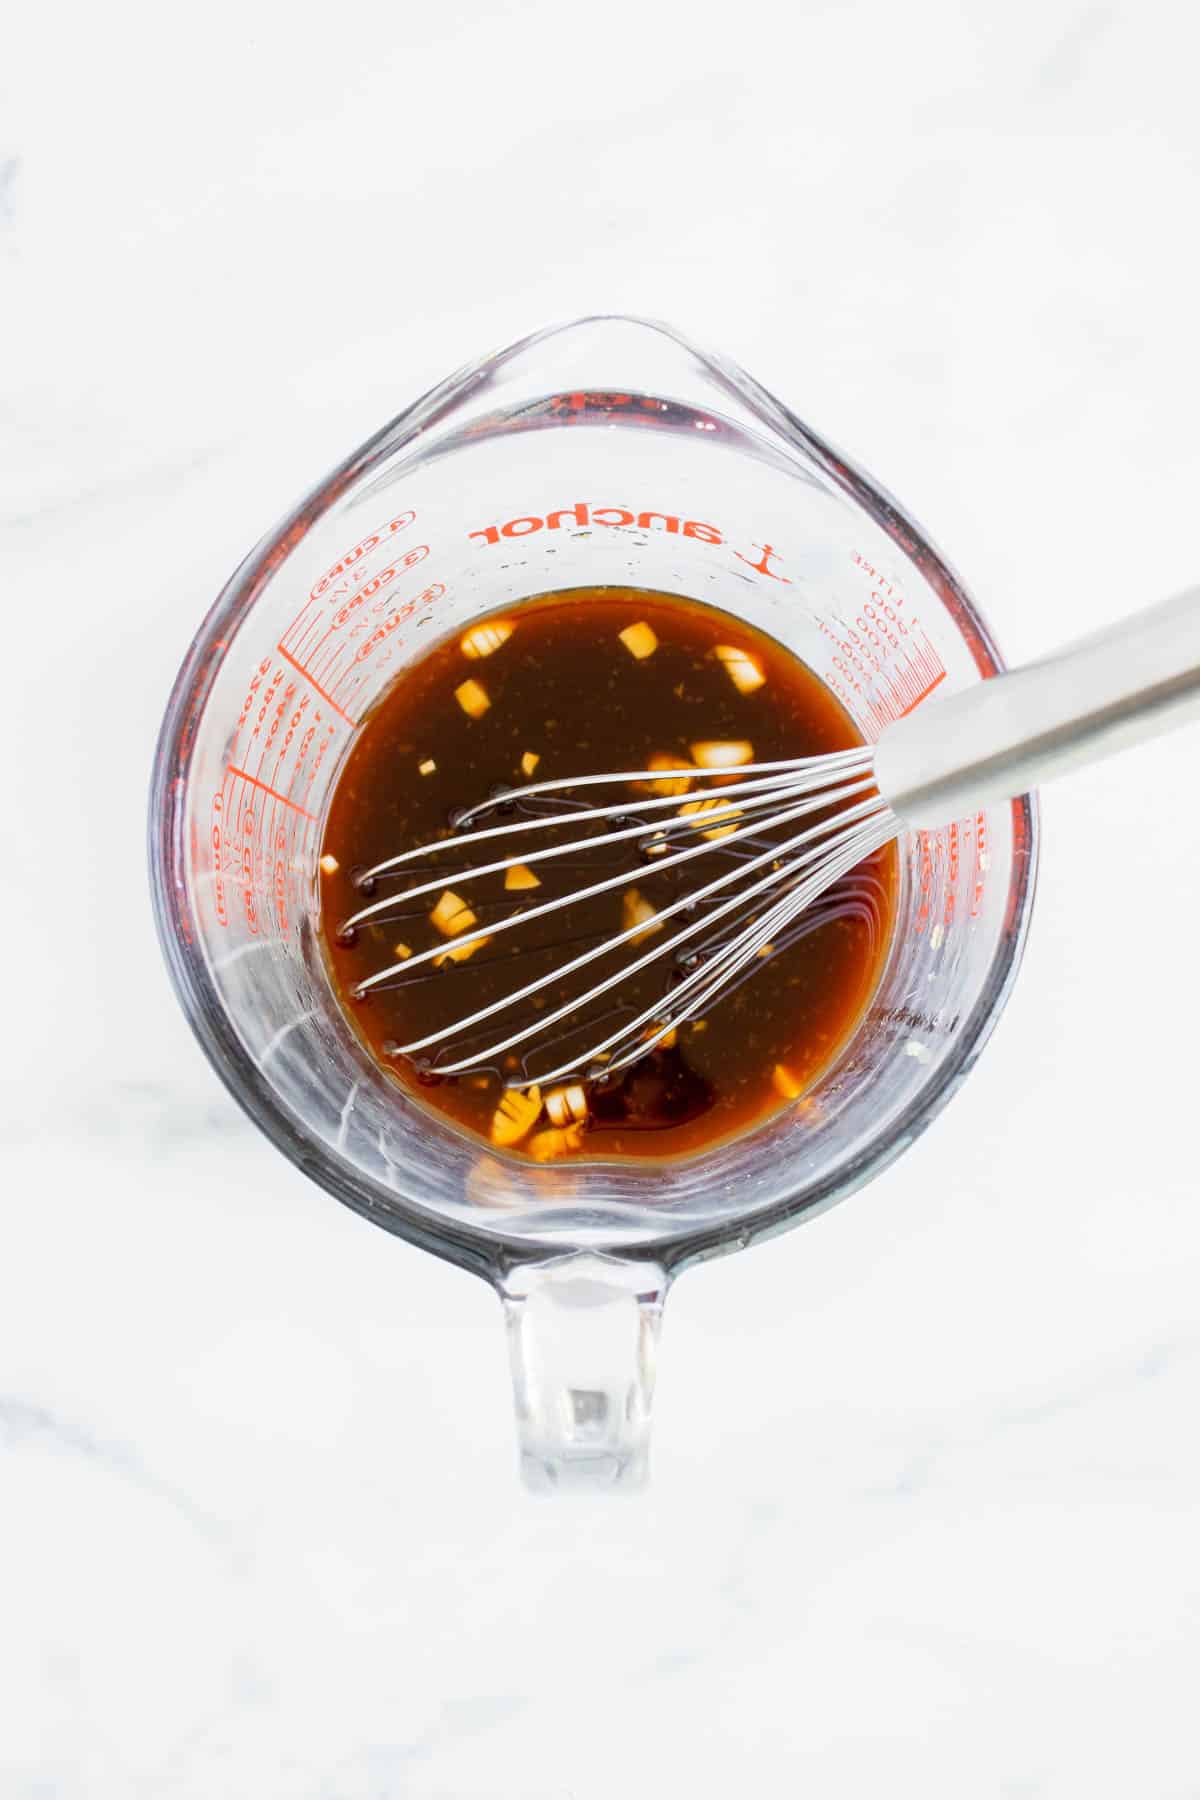 Overhead image of sauce in a glass measuring cup with a metal wisk